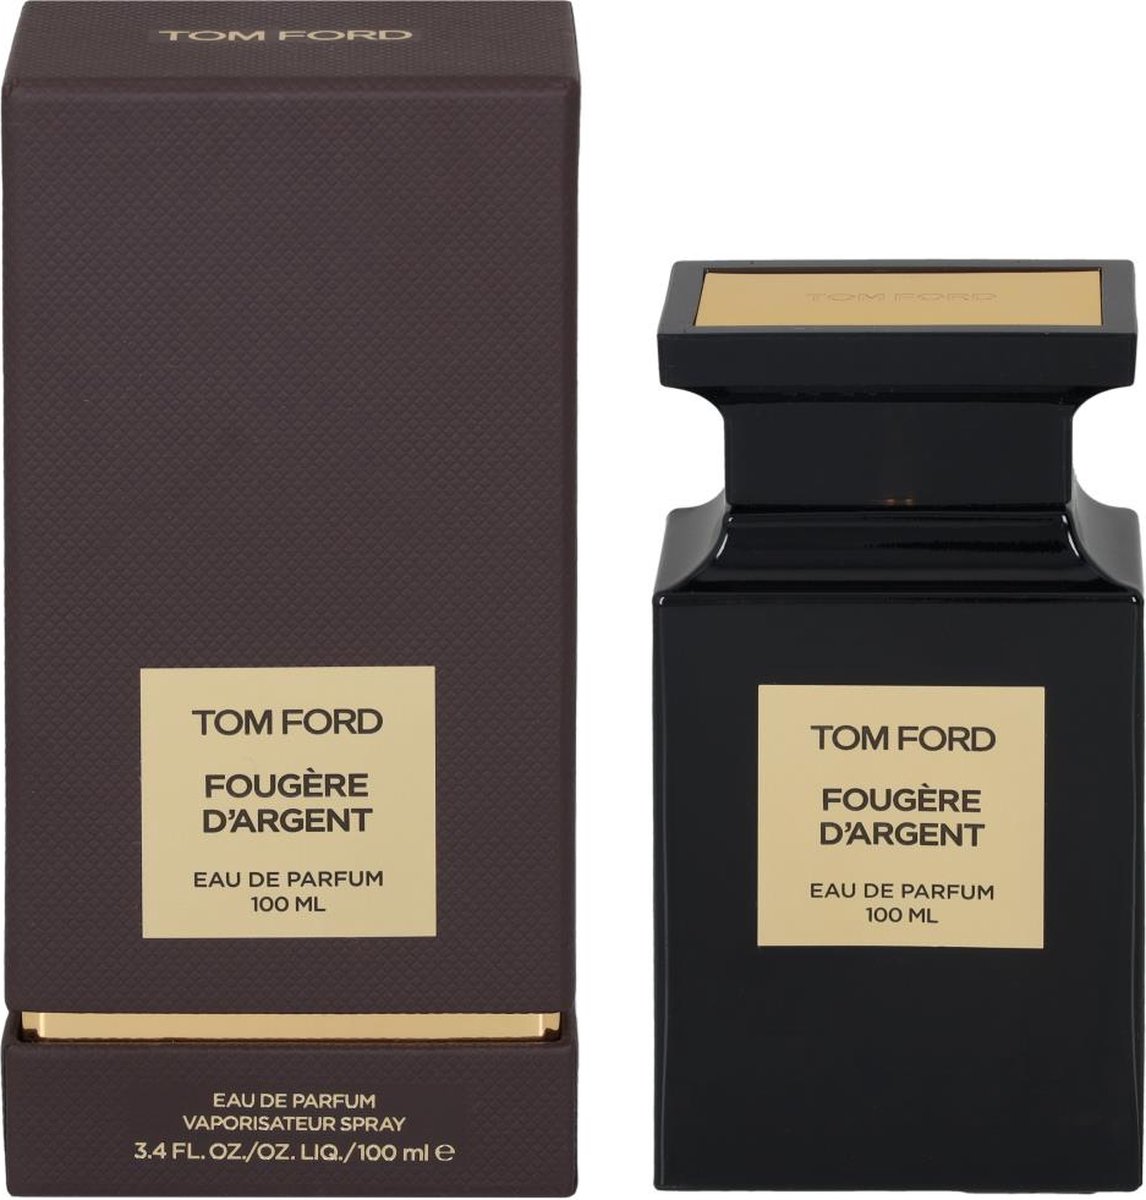 TOM FORD Fougere D'argent Unisexe 100 ml 